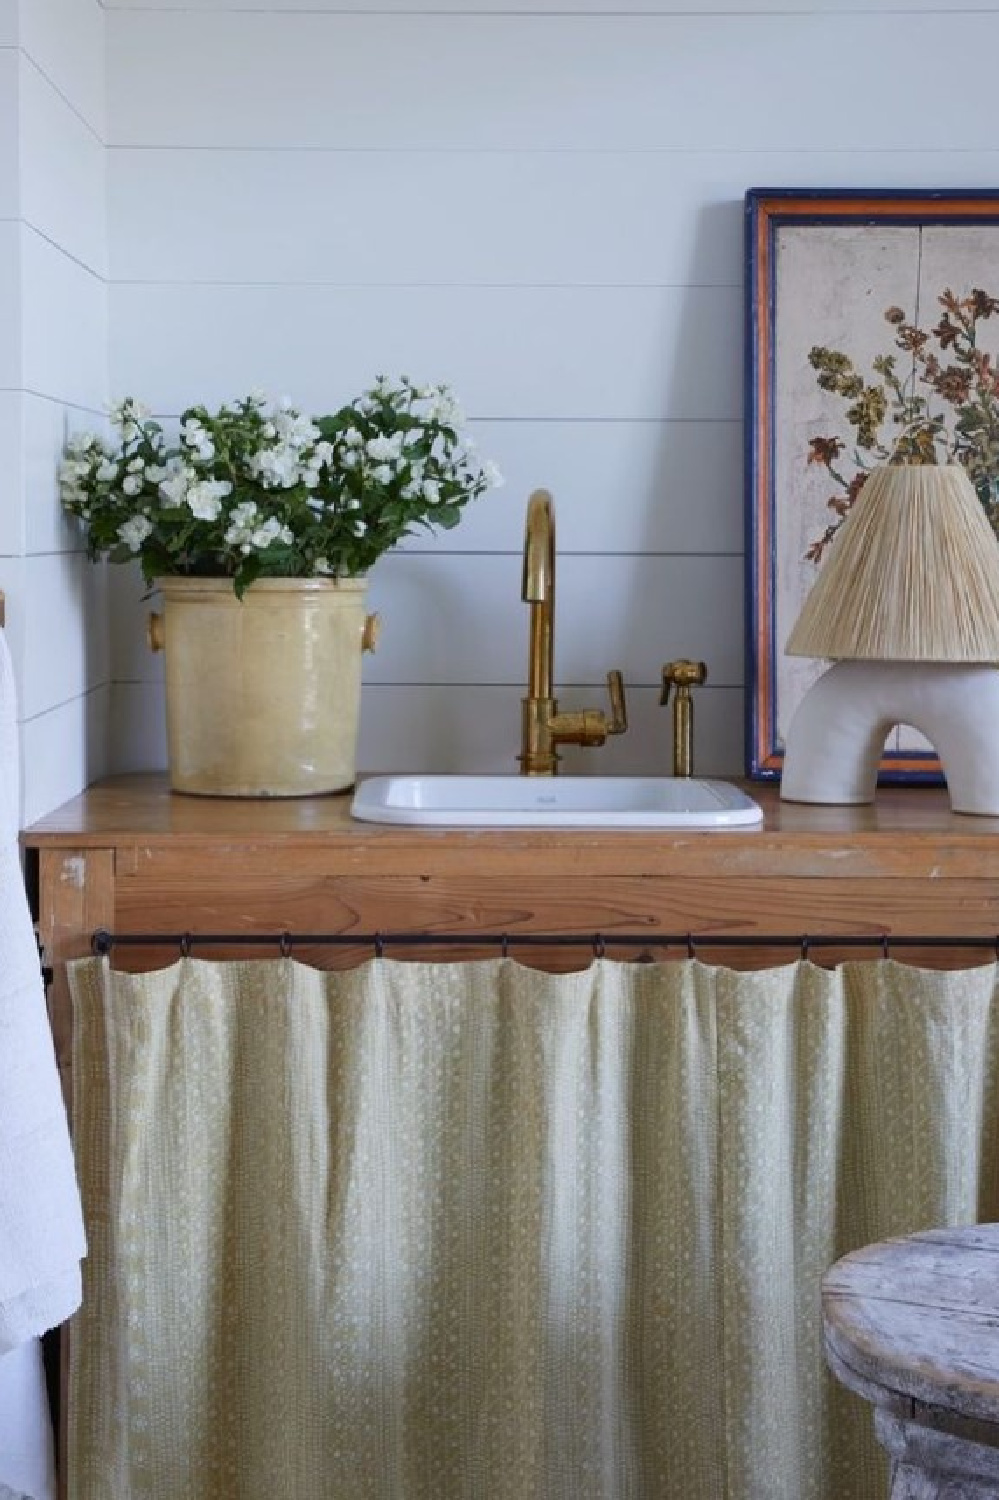 Skirted sink. Timeless interior design by Shannon Bowers with nods to European antiques, patina, understated elegance, and sophisticated simplicity. #shannonbowers #timelessinteriors